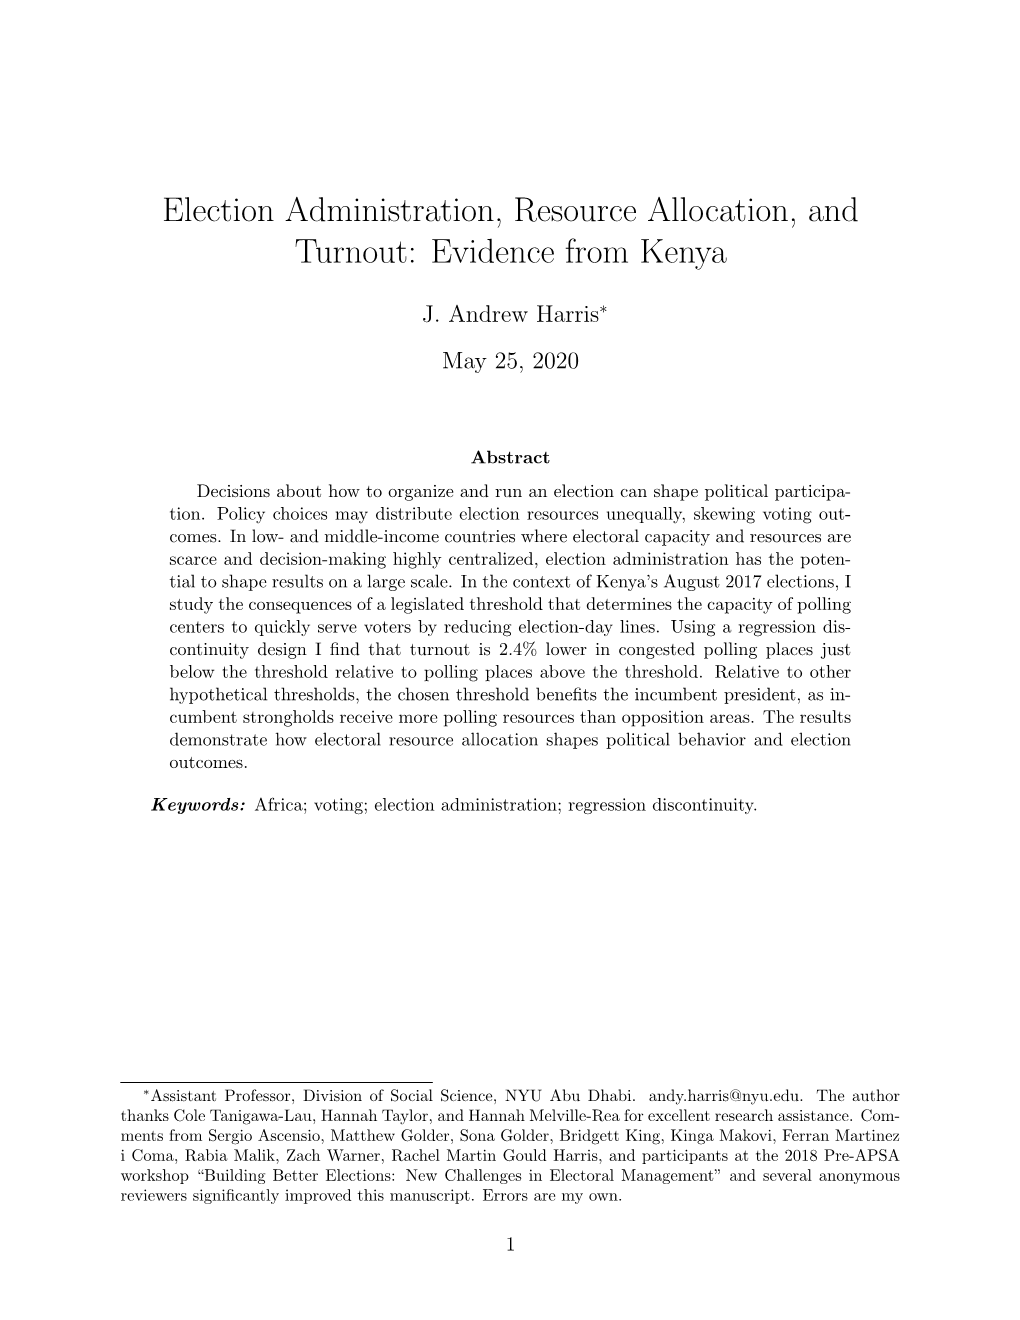 Election Administration, Resource Allocation, and Turnout: Evidence from Kenya